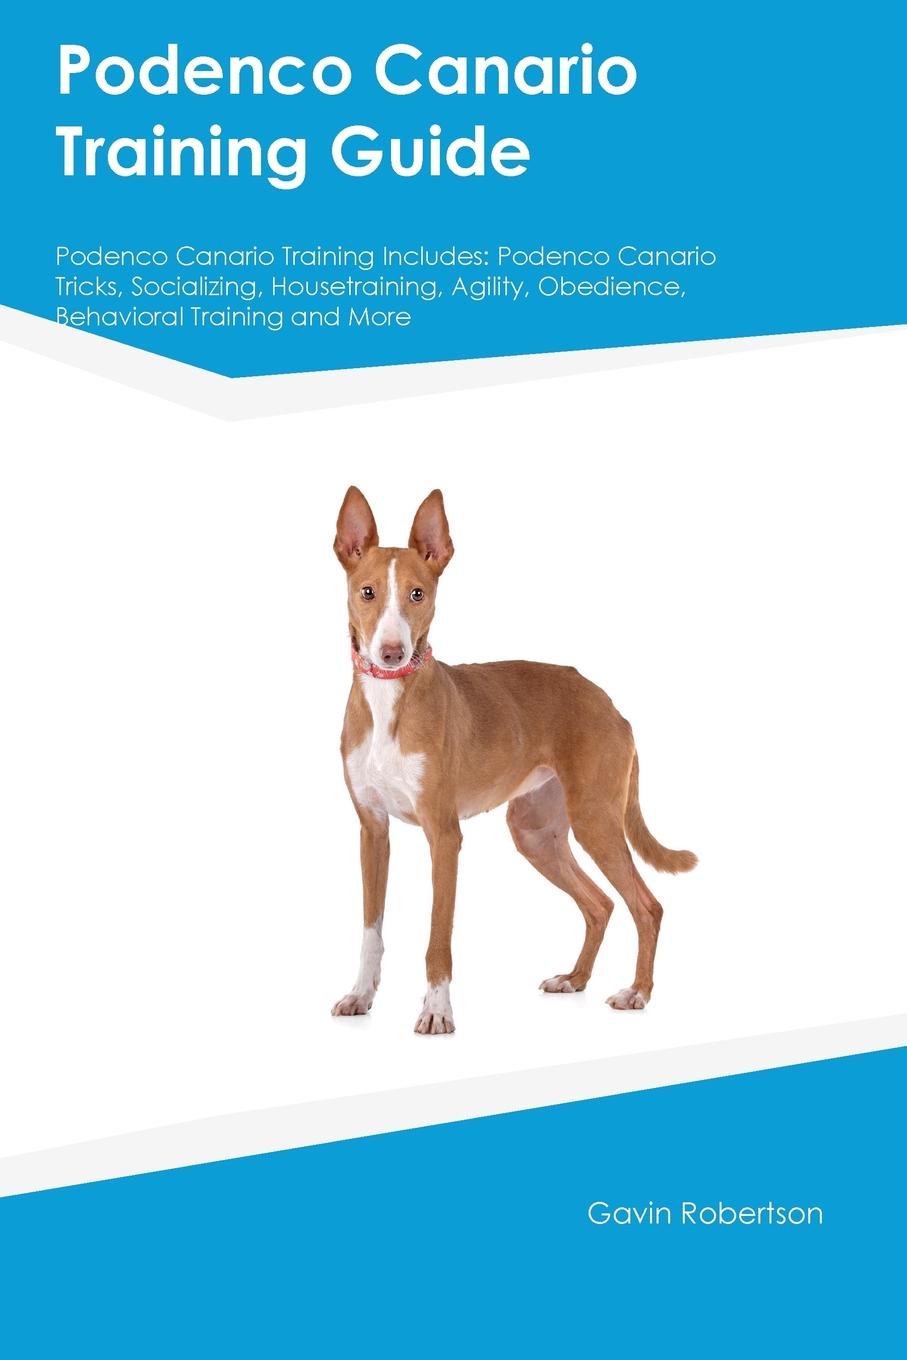 Podenco Canario Training Guide Podenco Canario Training Includes. Podenco Canario Tricks, Socializing, Housetraining, Agility, Obedience, Behavioral Training and More